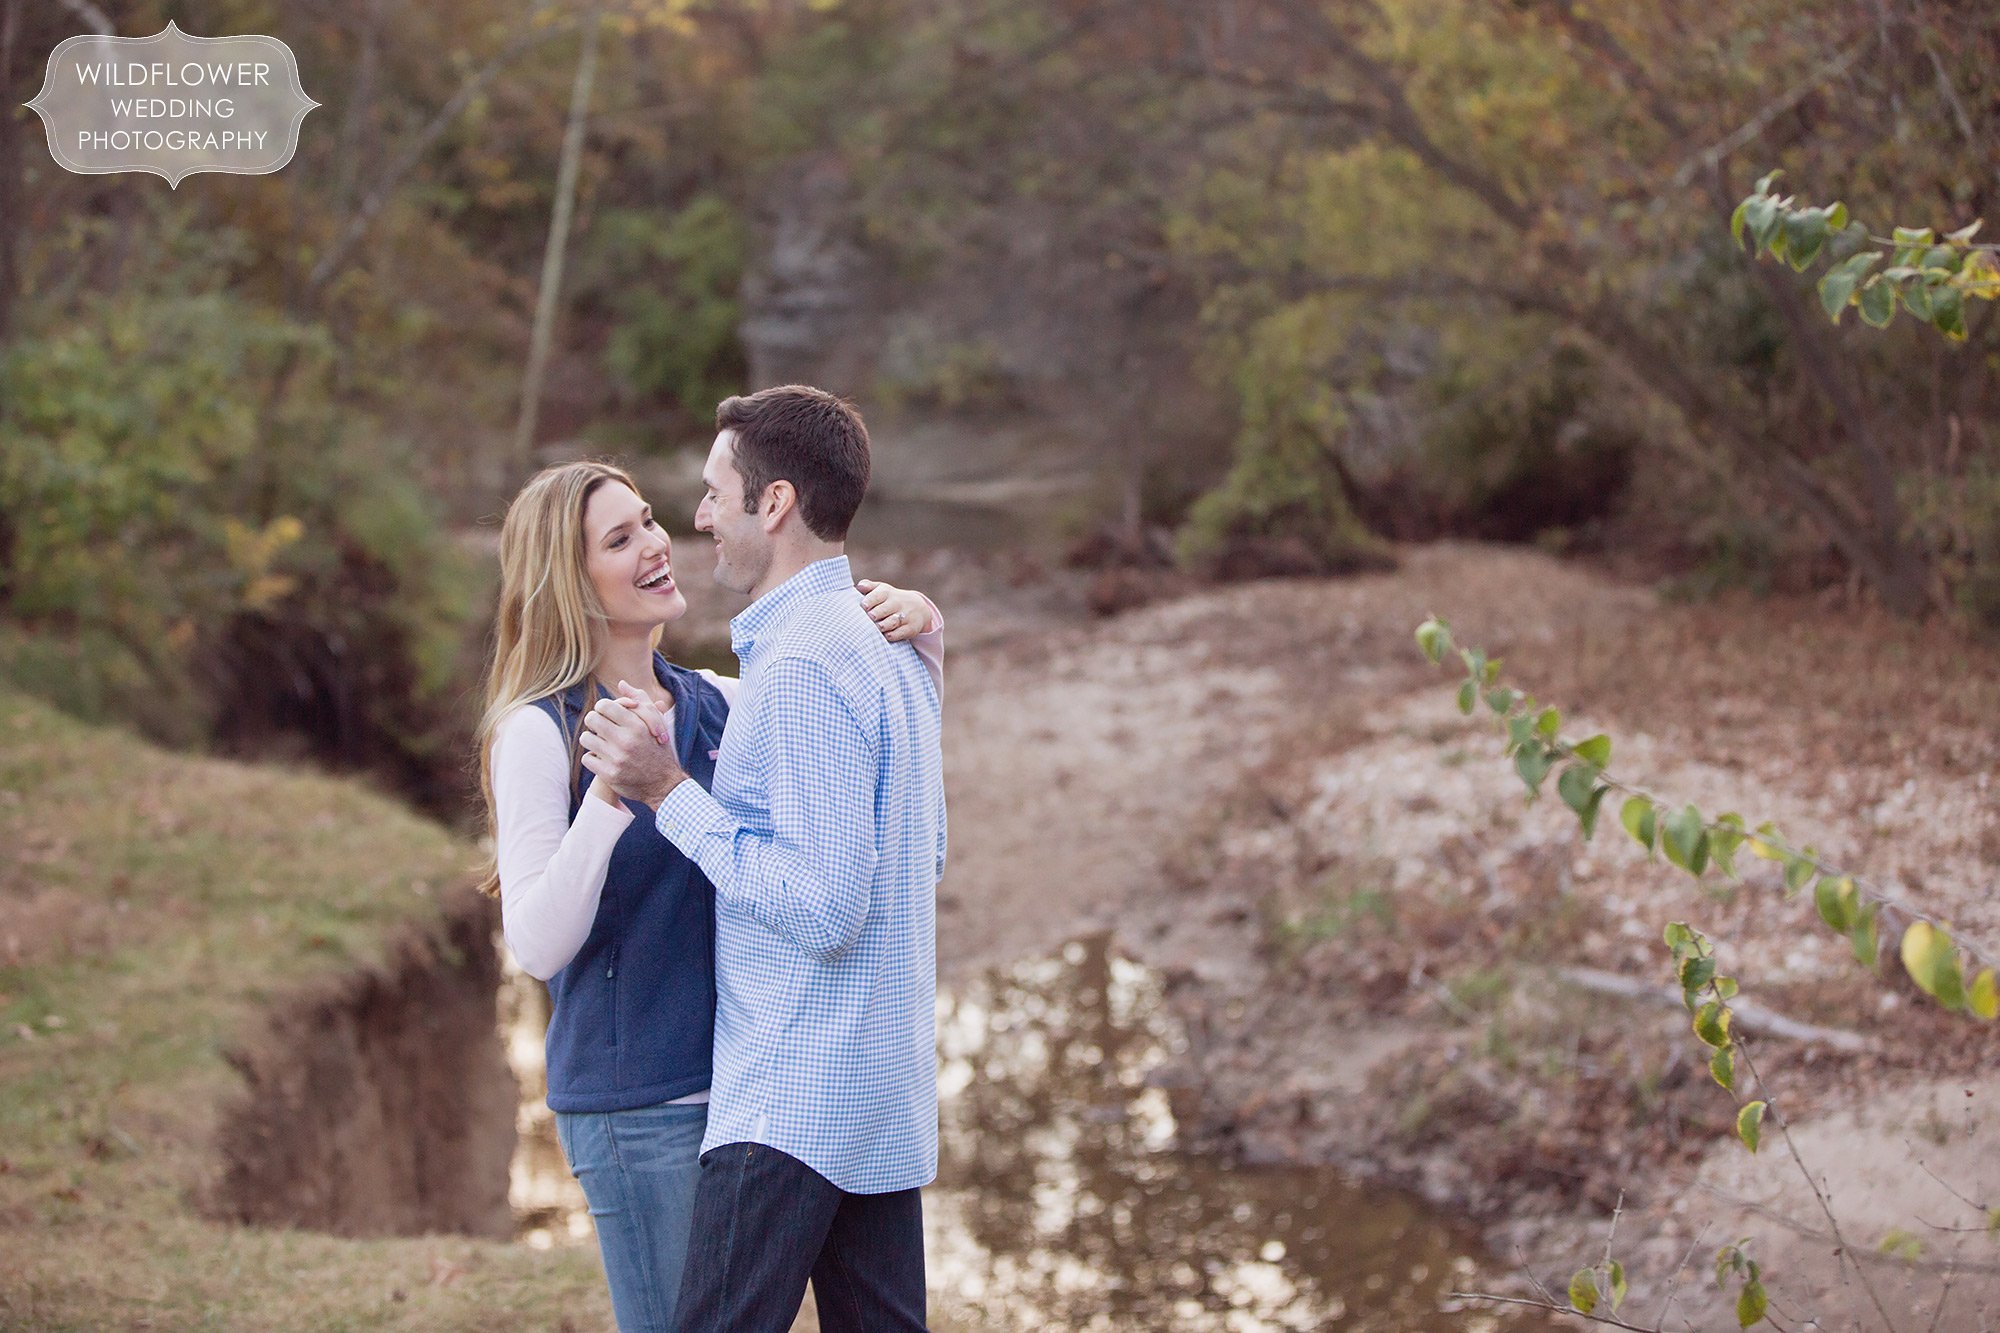 Sweet candid engagement photo of the couple laughing next to the Hinkson Creek during their outdoor Anthropologie engagement photography session.